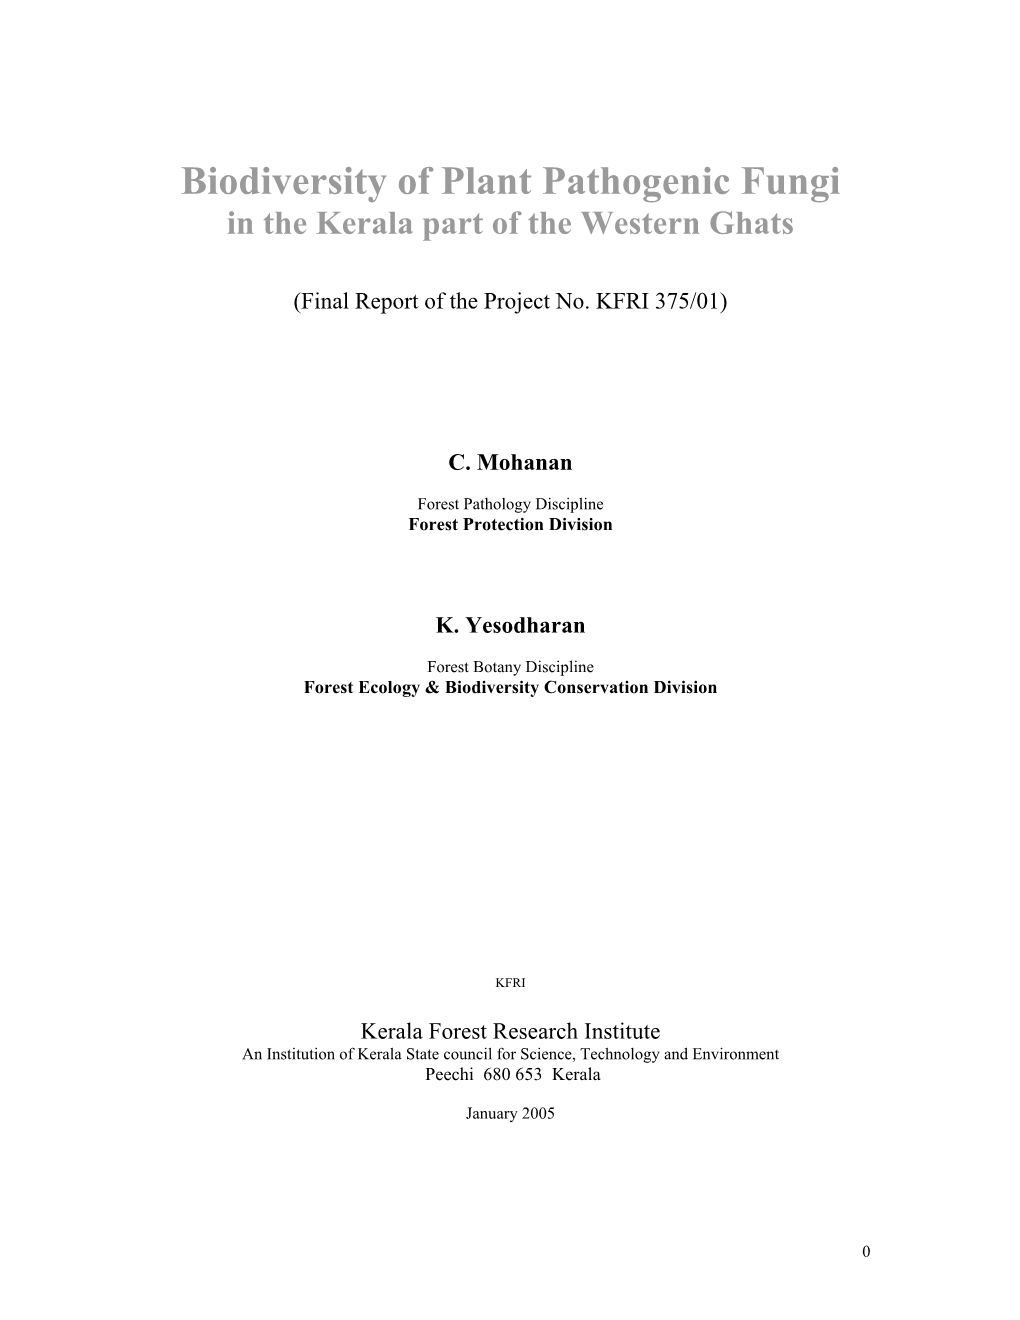 Biodiversity of Plant Pathogenic Fungi in the Kerala Part of the Western Ghats